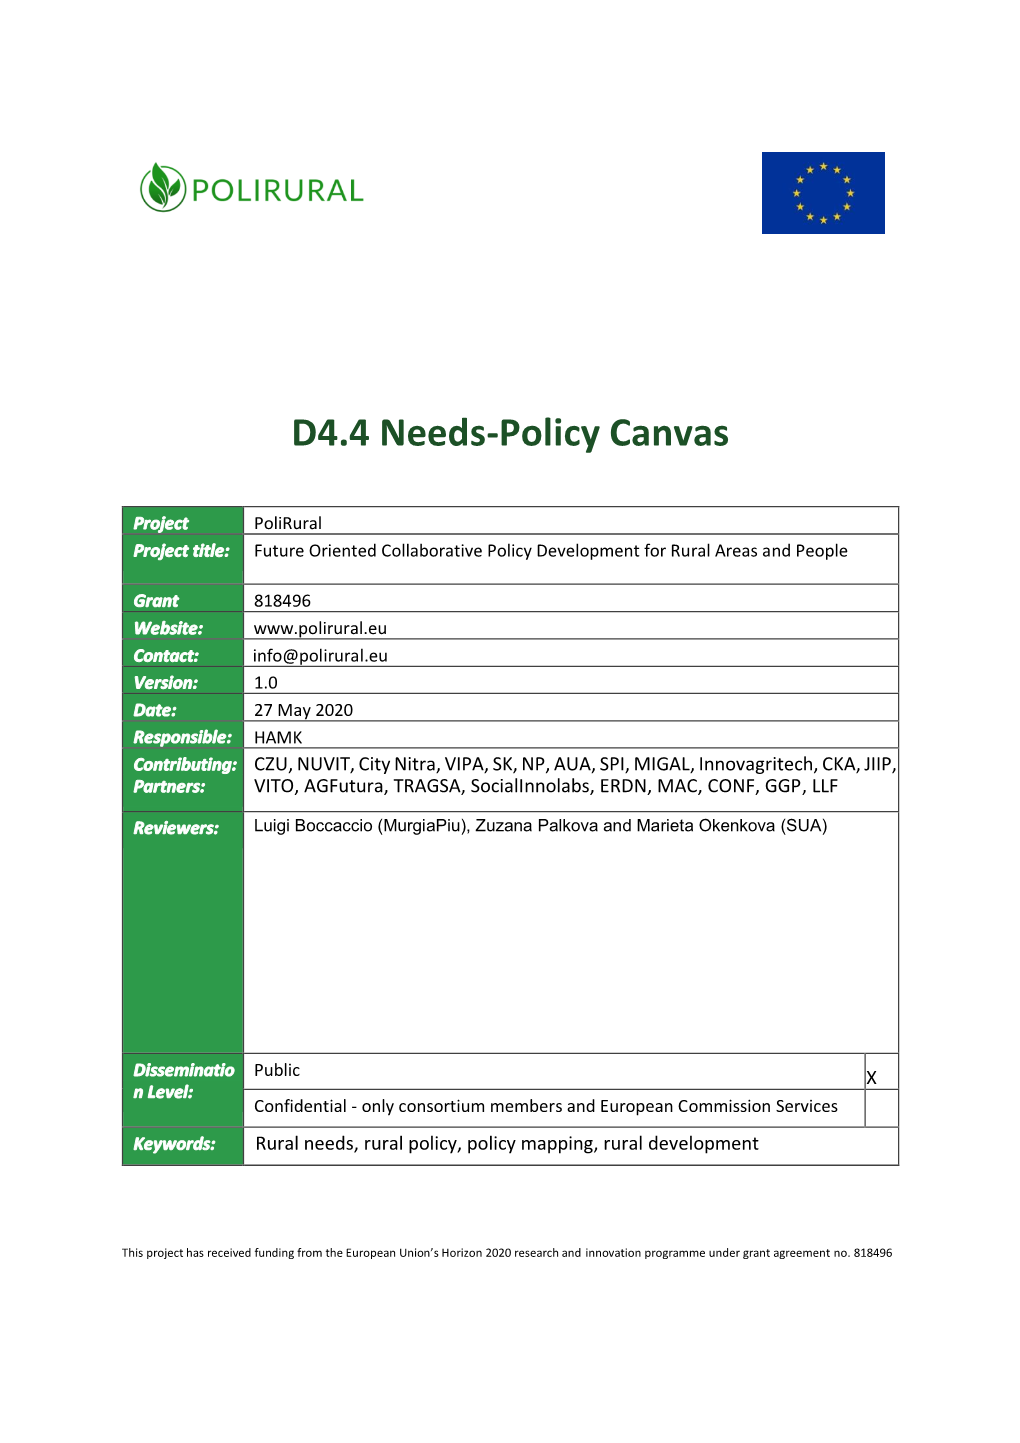 D4.4 Needs-Policy Canvas